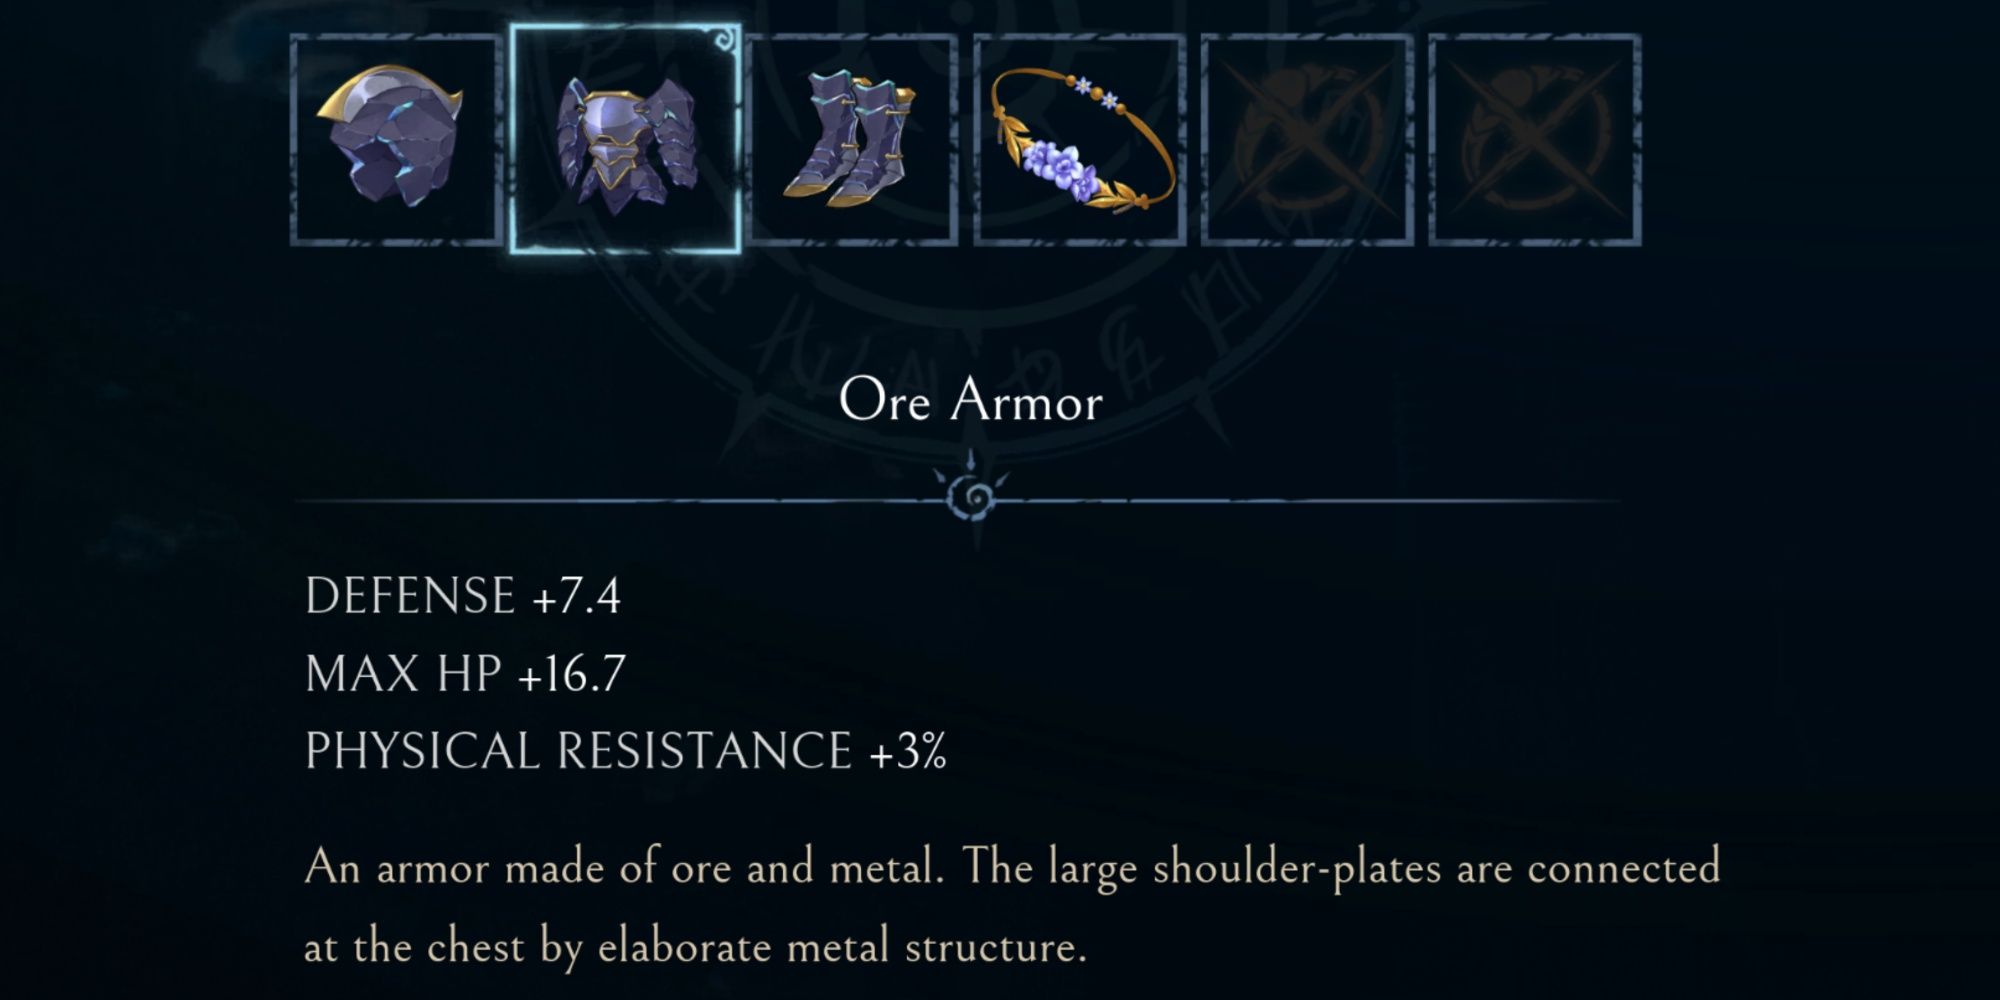 The Stats of the Ore Armor piece, showcasing it's increased Defense, Max HP, and Physical Resistance in Afterimage